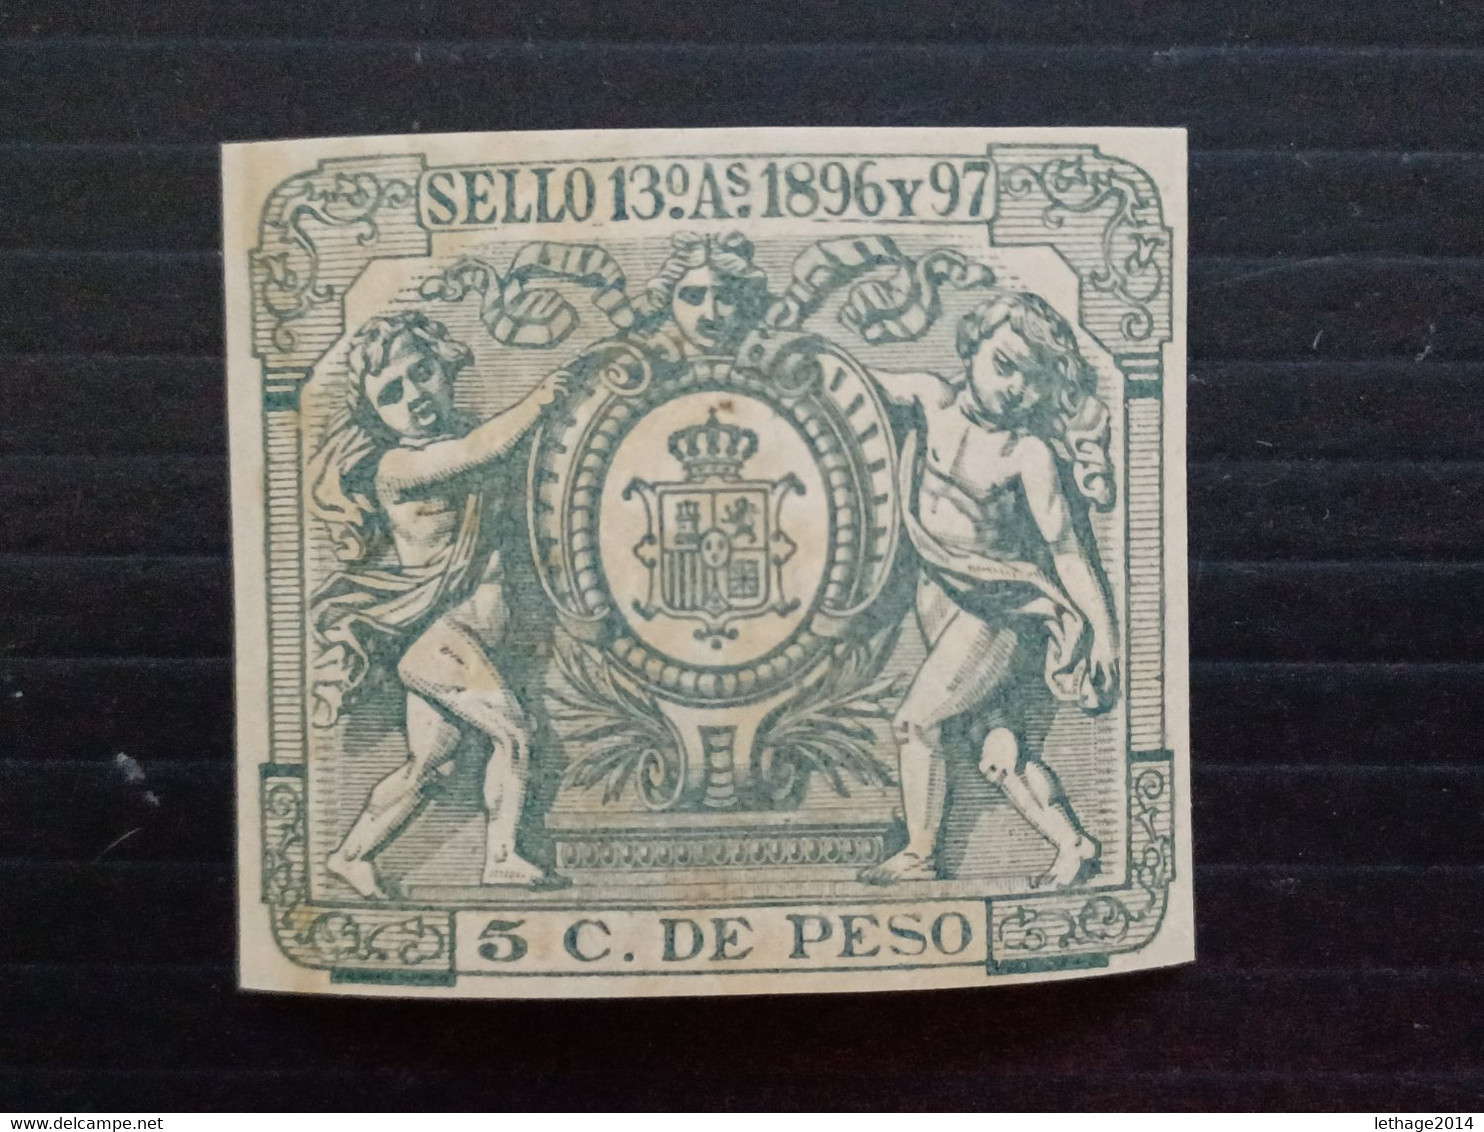 STAMPS CUBA 1896 FISCAL MARITIME NAVAL COMMERCIAL EXCHANGE TAXES VERY RARE MNH ORIGINAL - Strafport